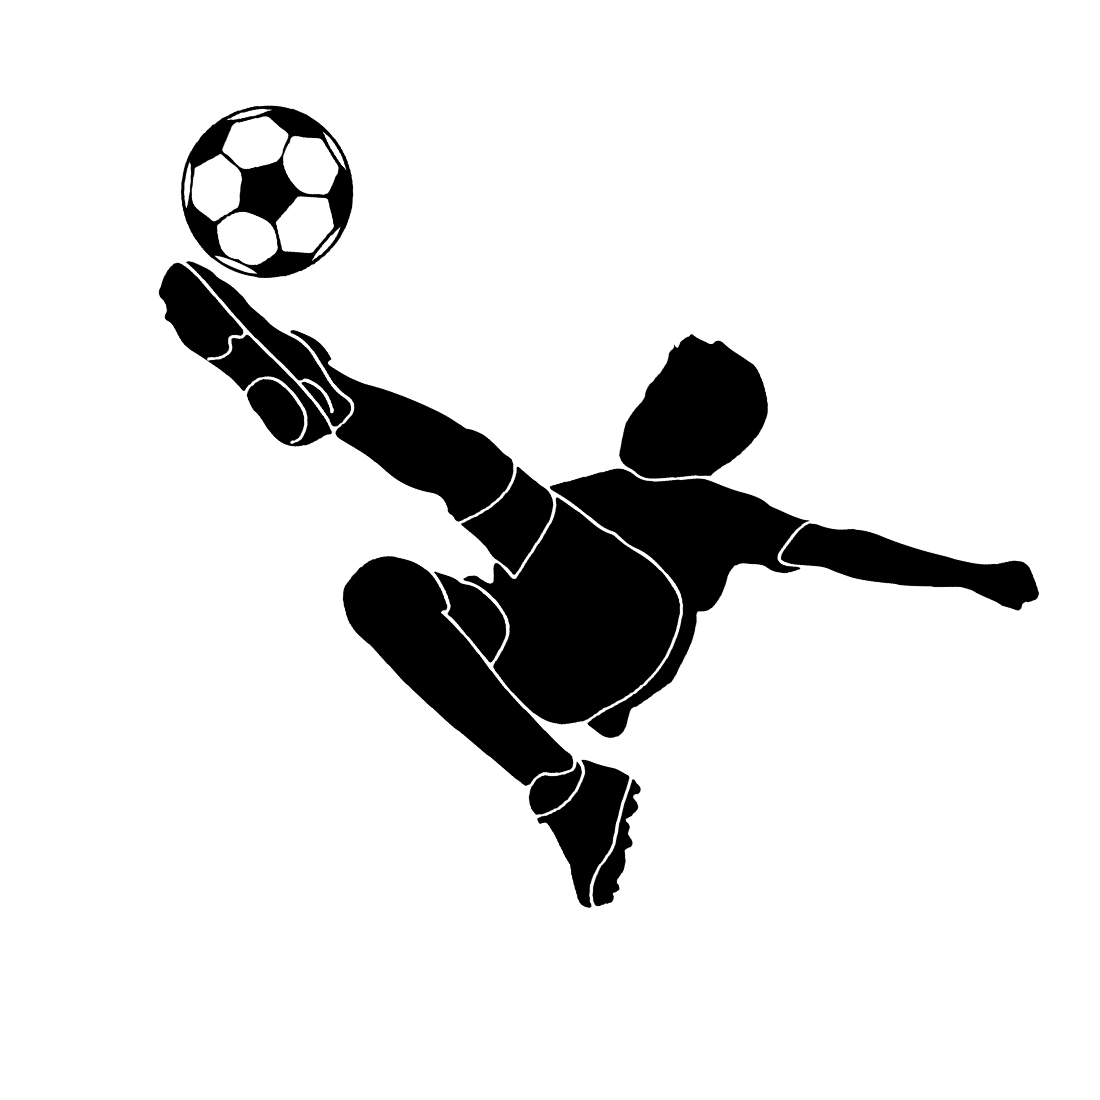 Football Kid Player Silhouette: Vector Illustration for Youth Sports, Cartoon Illustration: Silhouette of a Kid Playing Football, Vector Graphics: Football Kid Player Silhouette Art preview image.